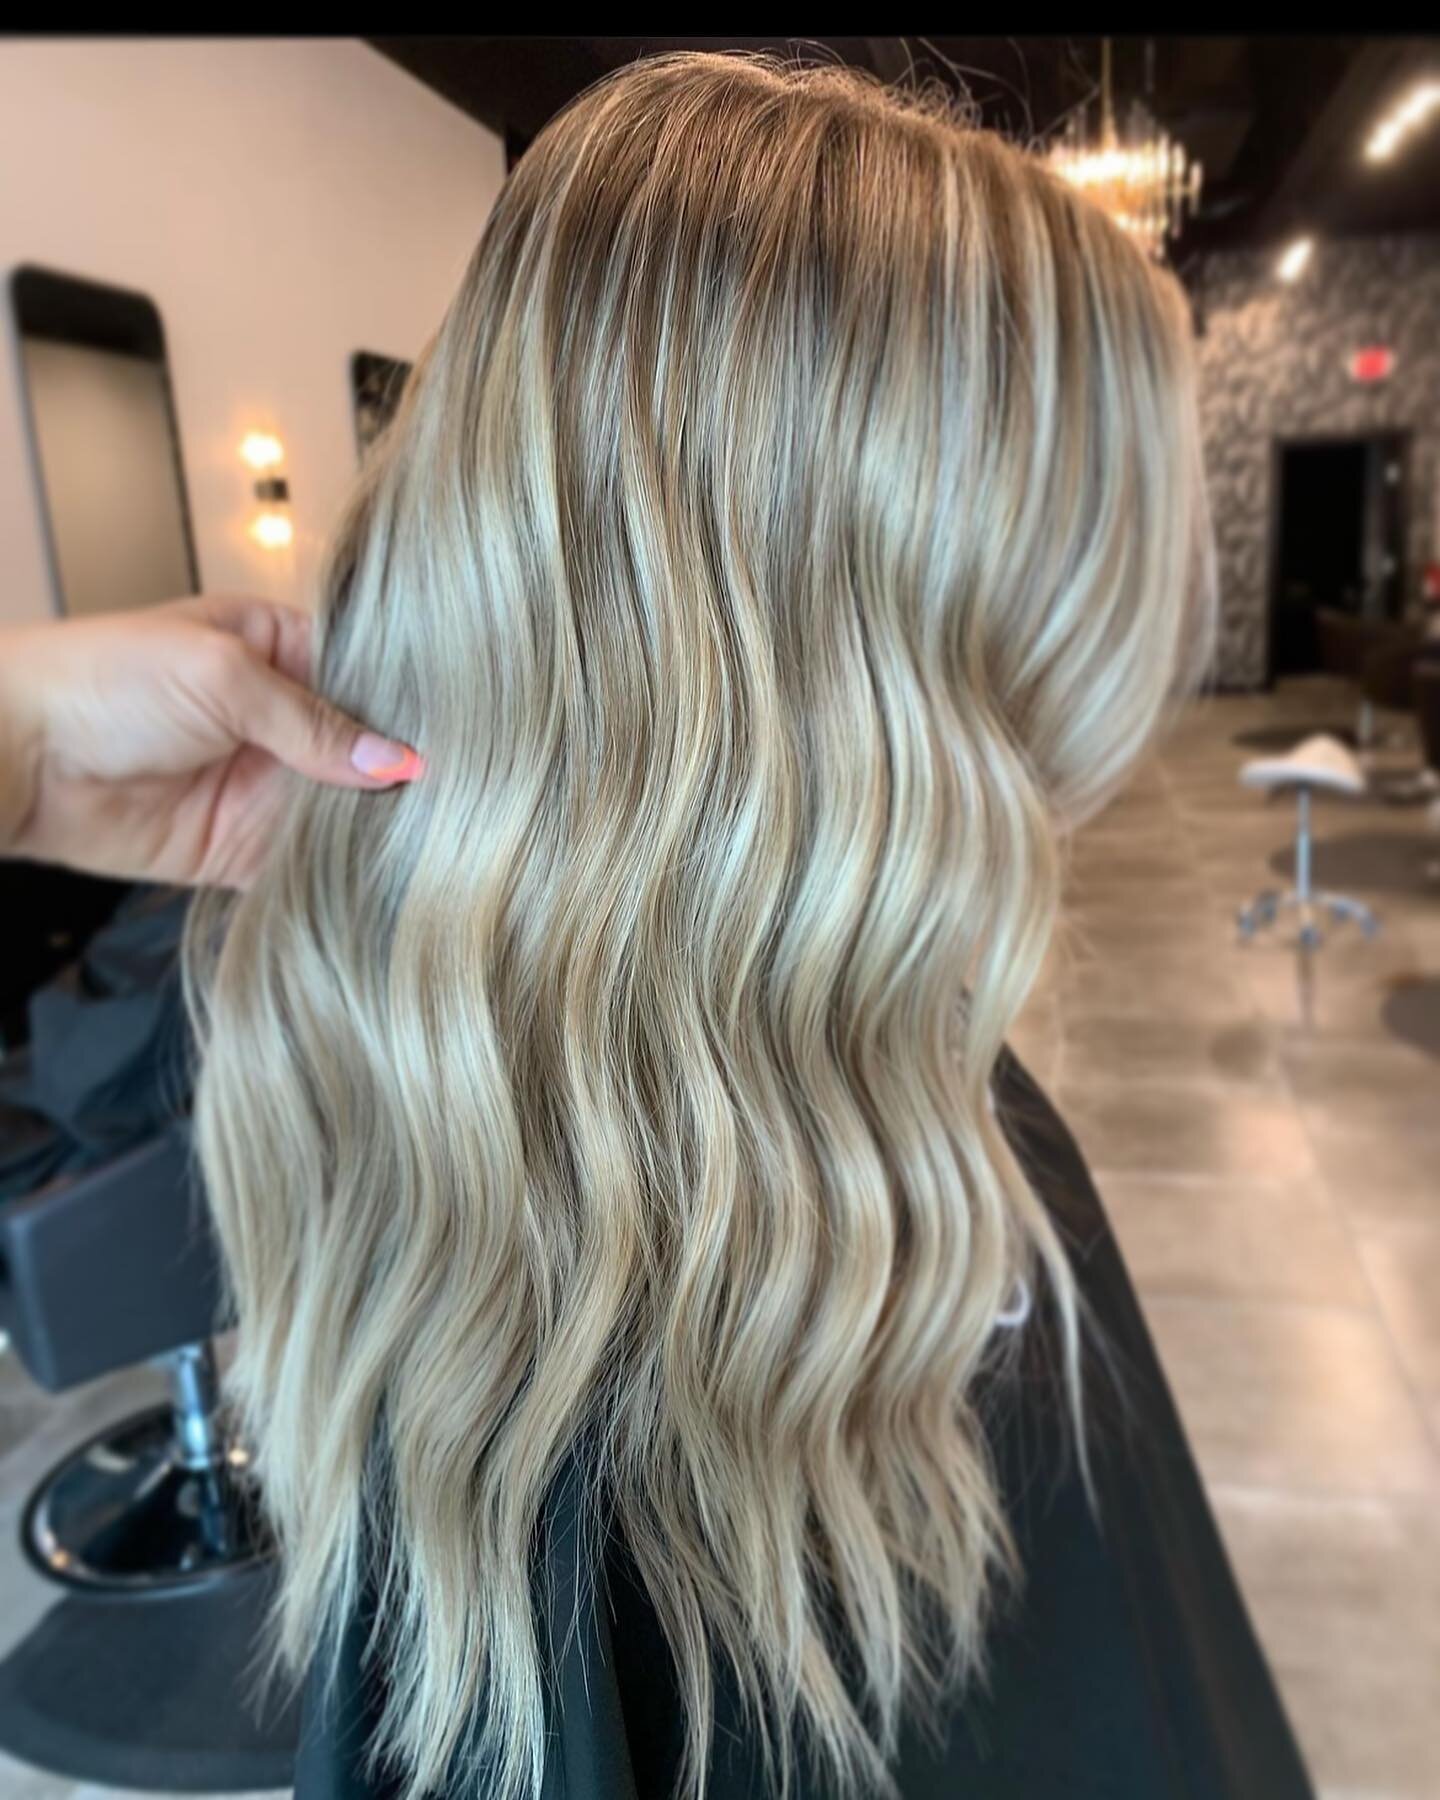 Happy Friday! 🤩 

This gorgeous color was created by @colored.by.chan